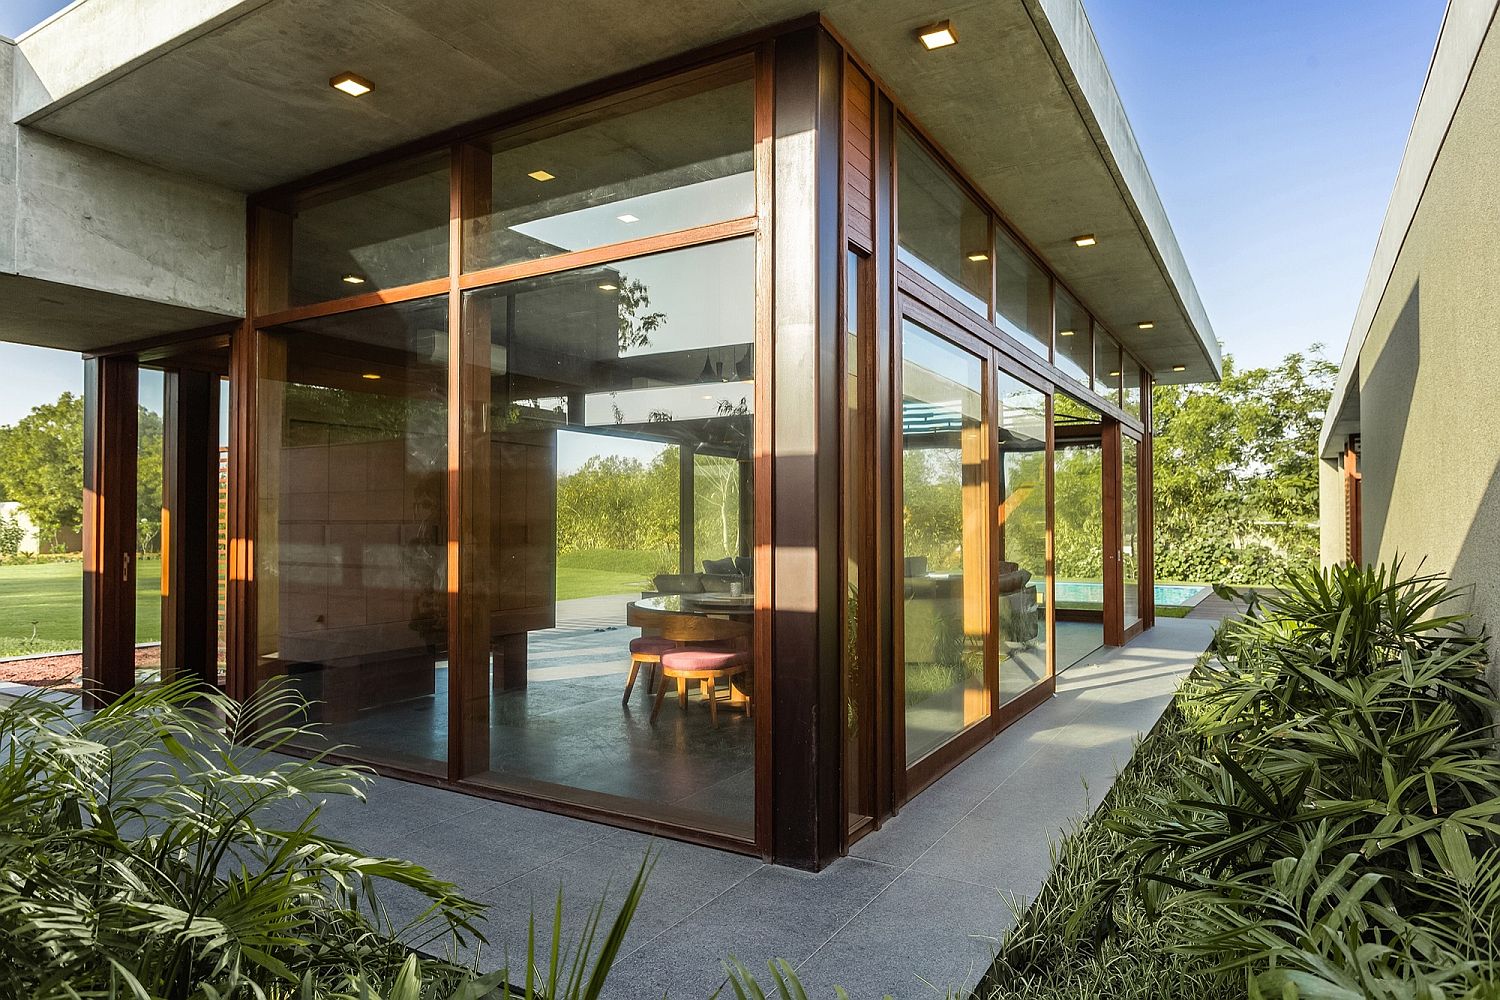 Large-glass-walls-and-sliding-doors-bring-the-outdoors-inside